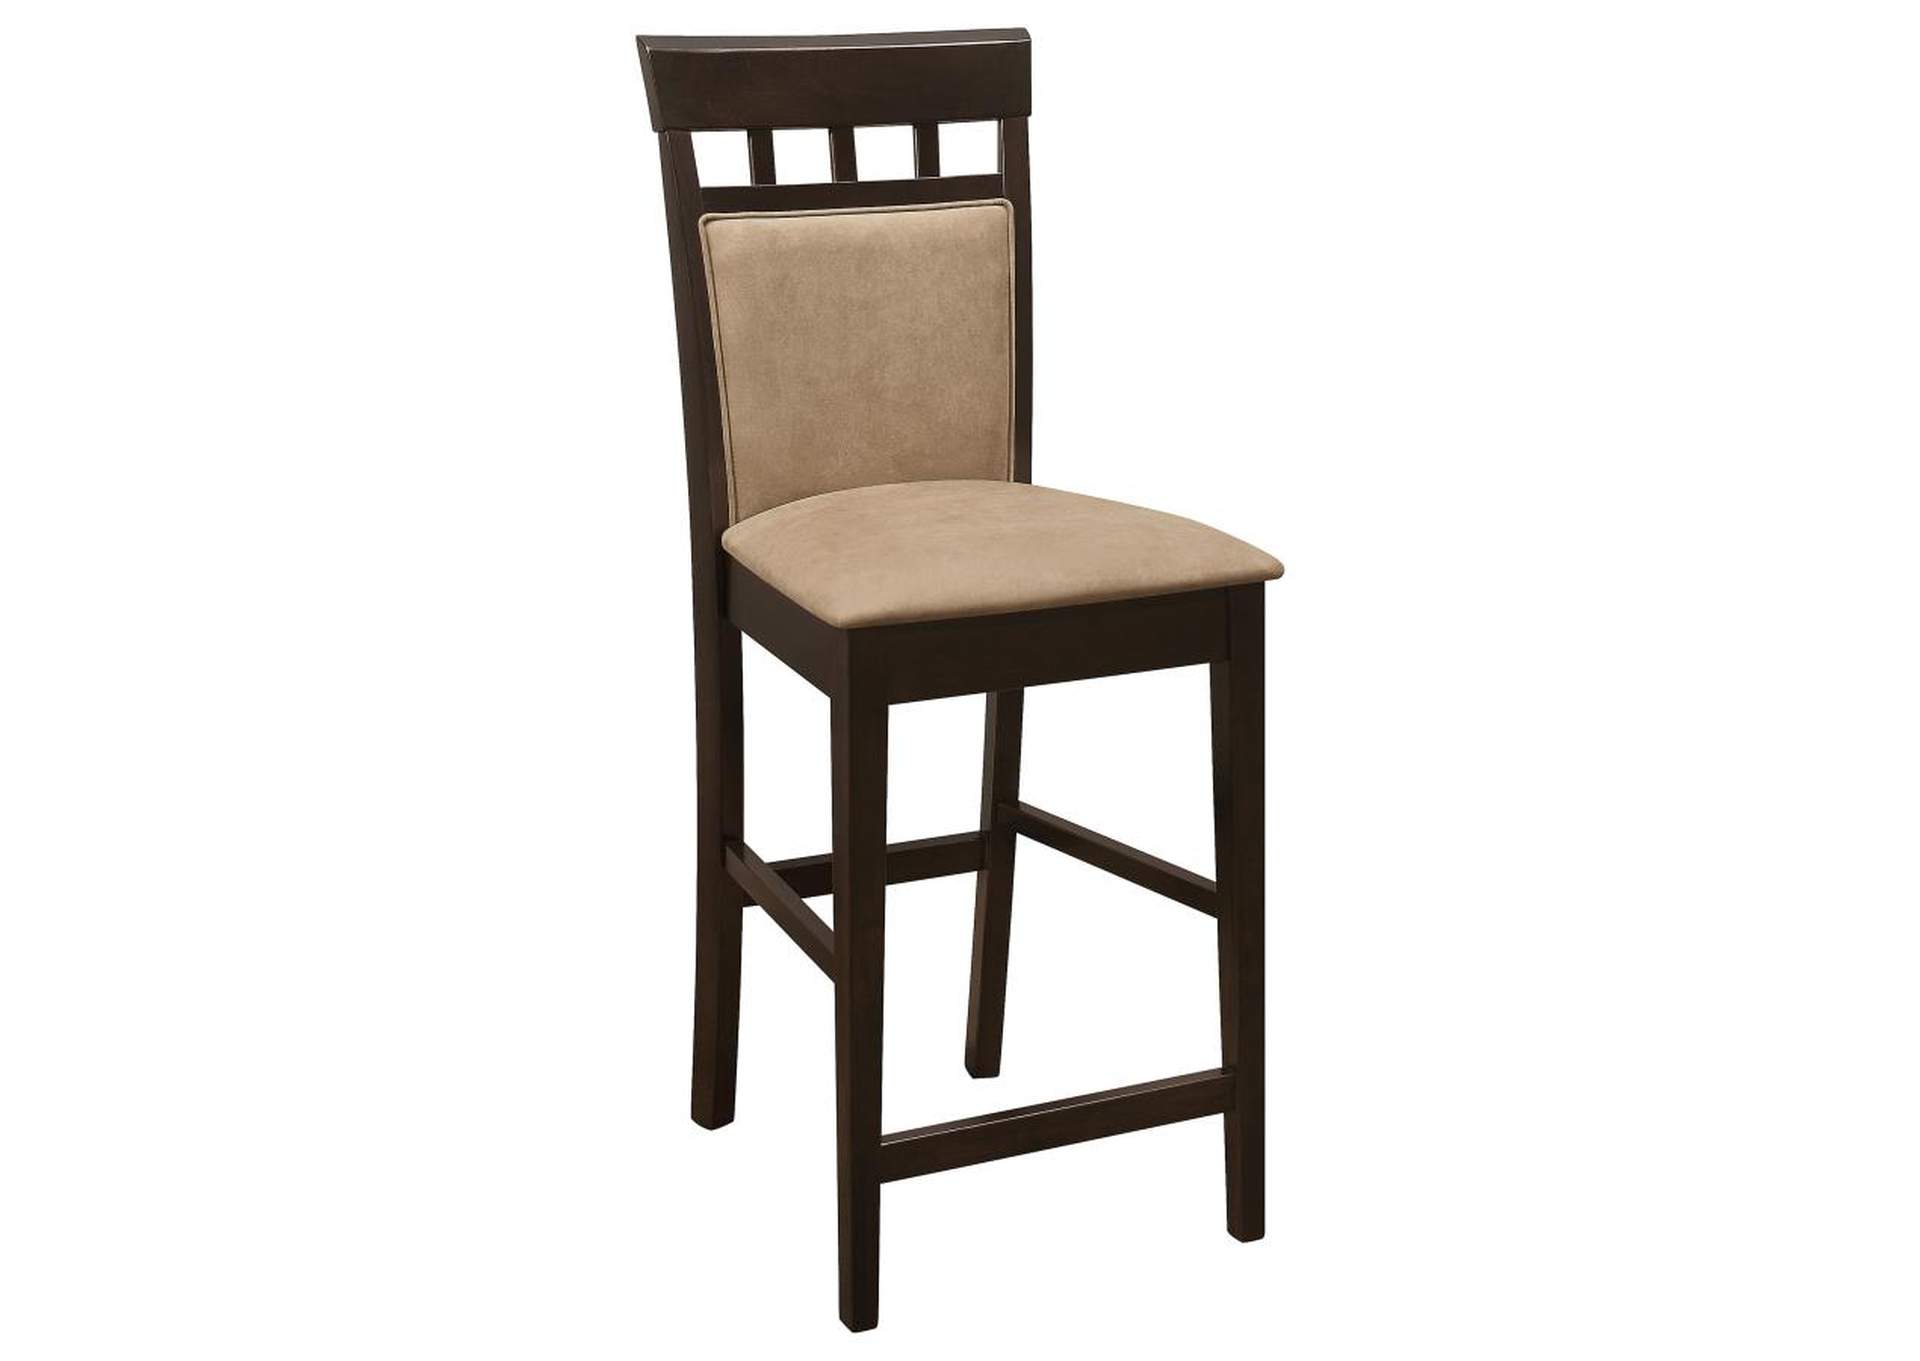 Clanton Upholstered Counter Height Stools Cappuccino And Tan (Set Of 2),Coaster Furniture